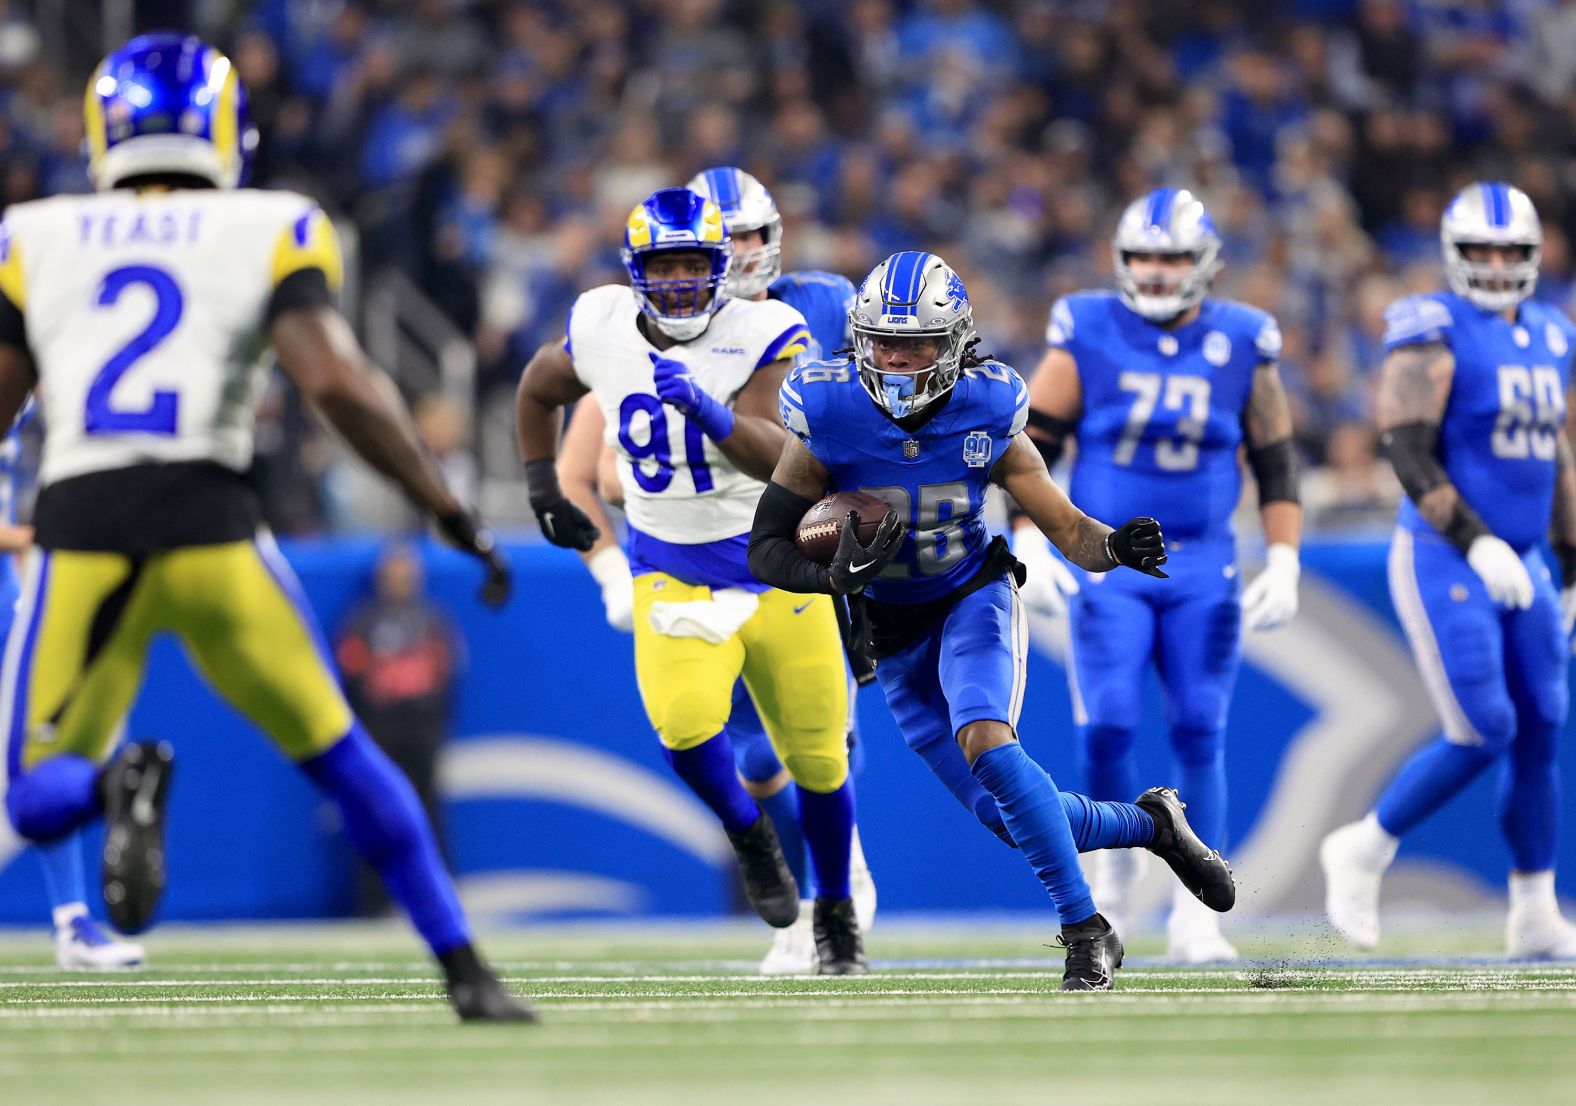 Detroit Lions running back Jahmyr Gibbs runs the ball during the Lions' 24-23 victory over the Los Angeles Rams on Sunday, January 14. It was the Lions' first playoff win since the 1991 season.